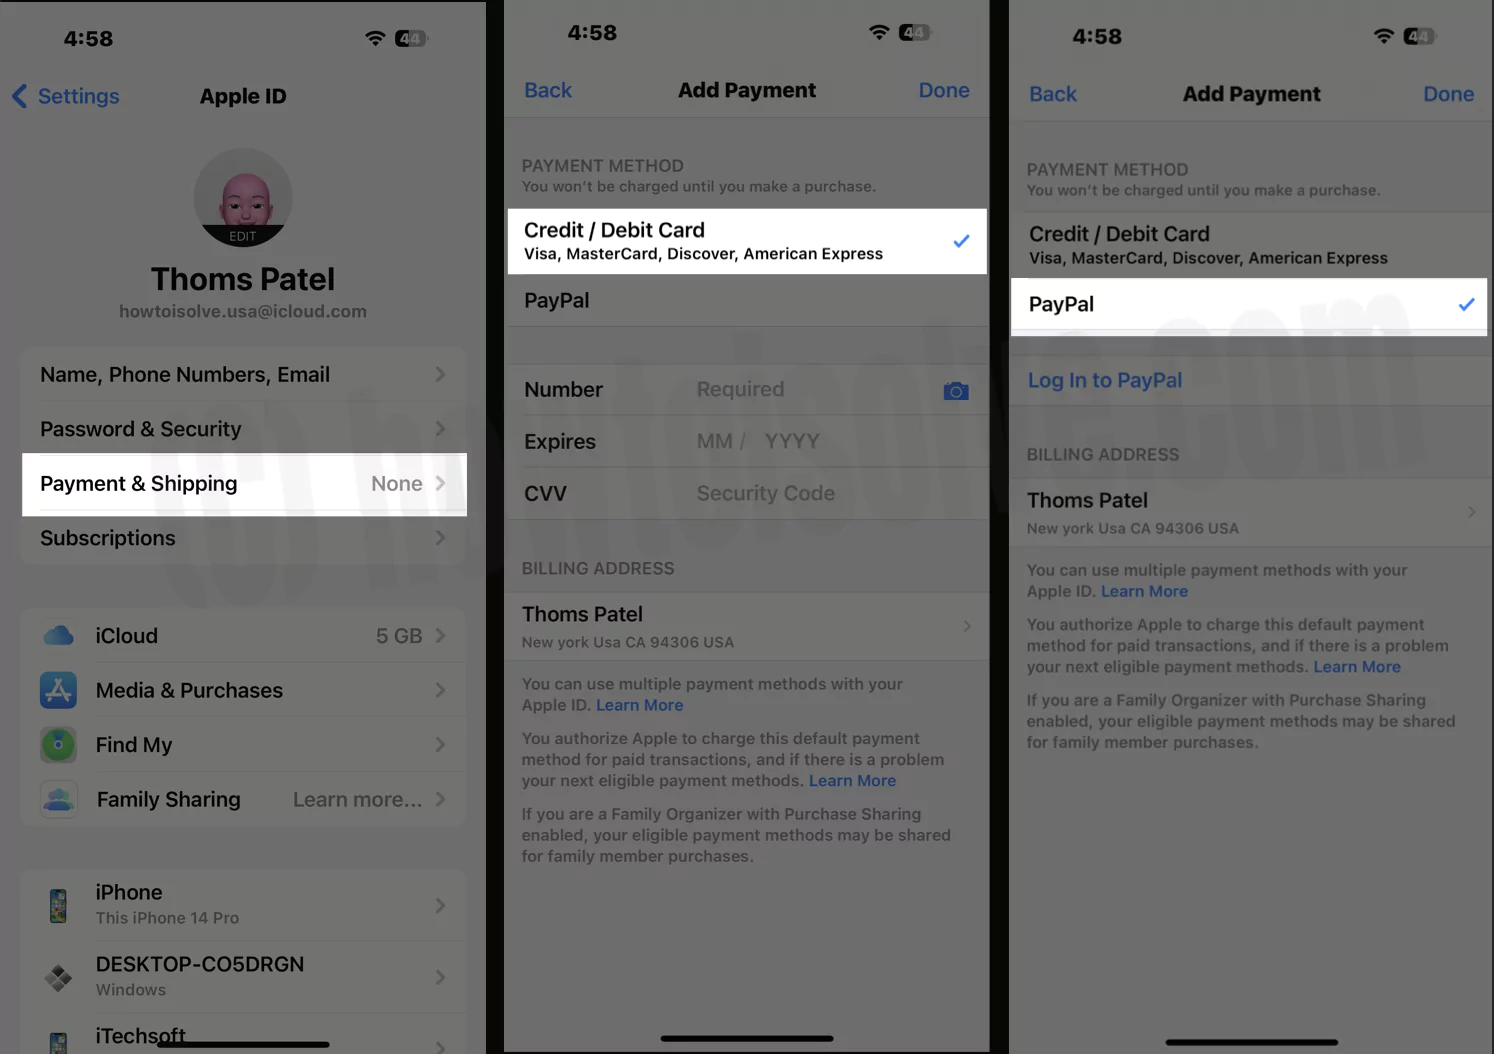 add-payment-method-to-apple-id-from-iphone